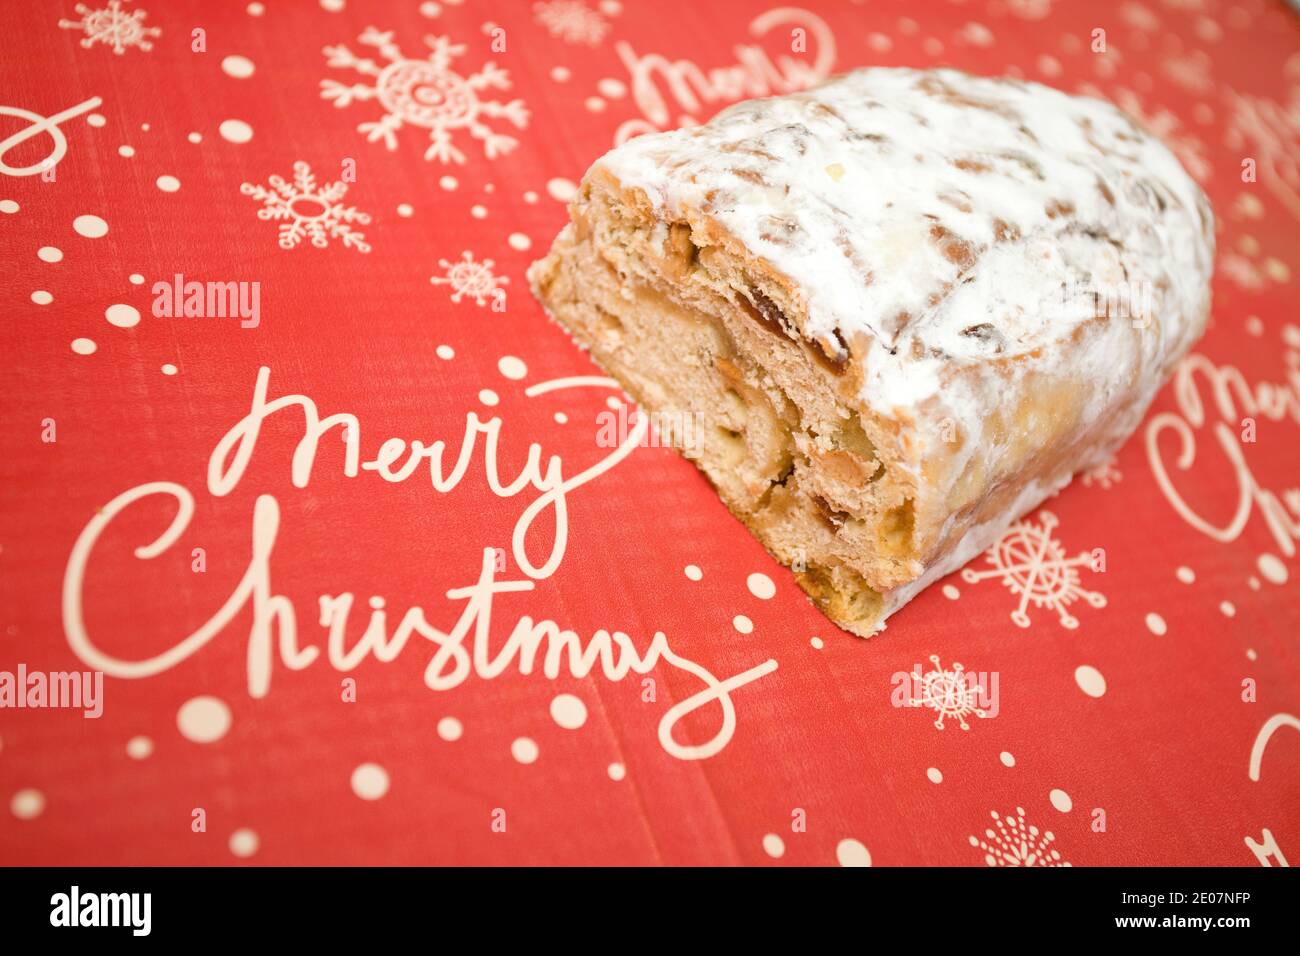 Stollen on Merry Christmas red and white background Stock Photo